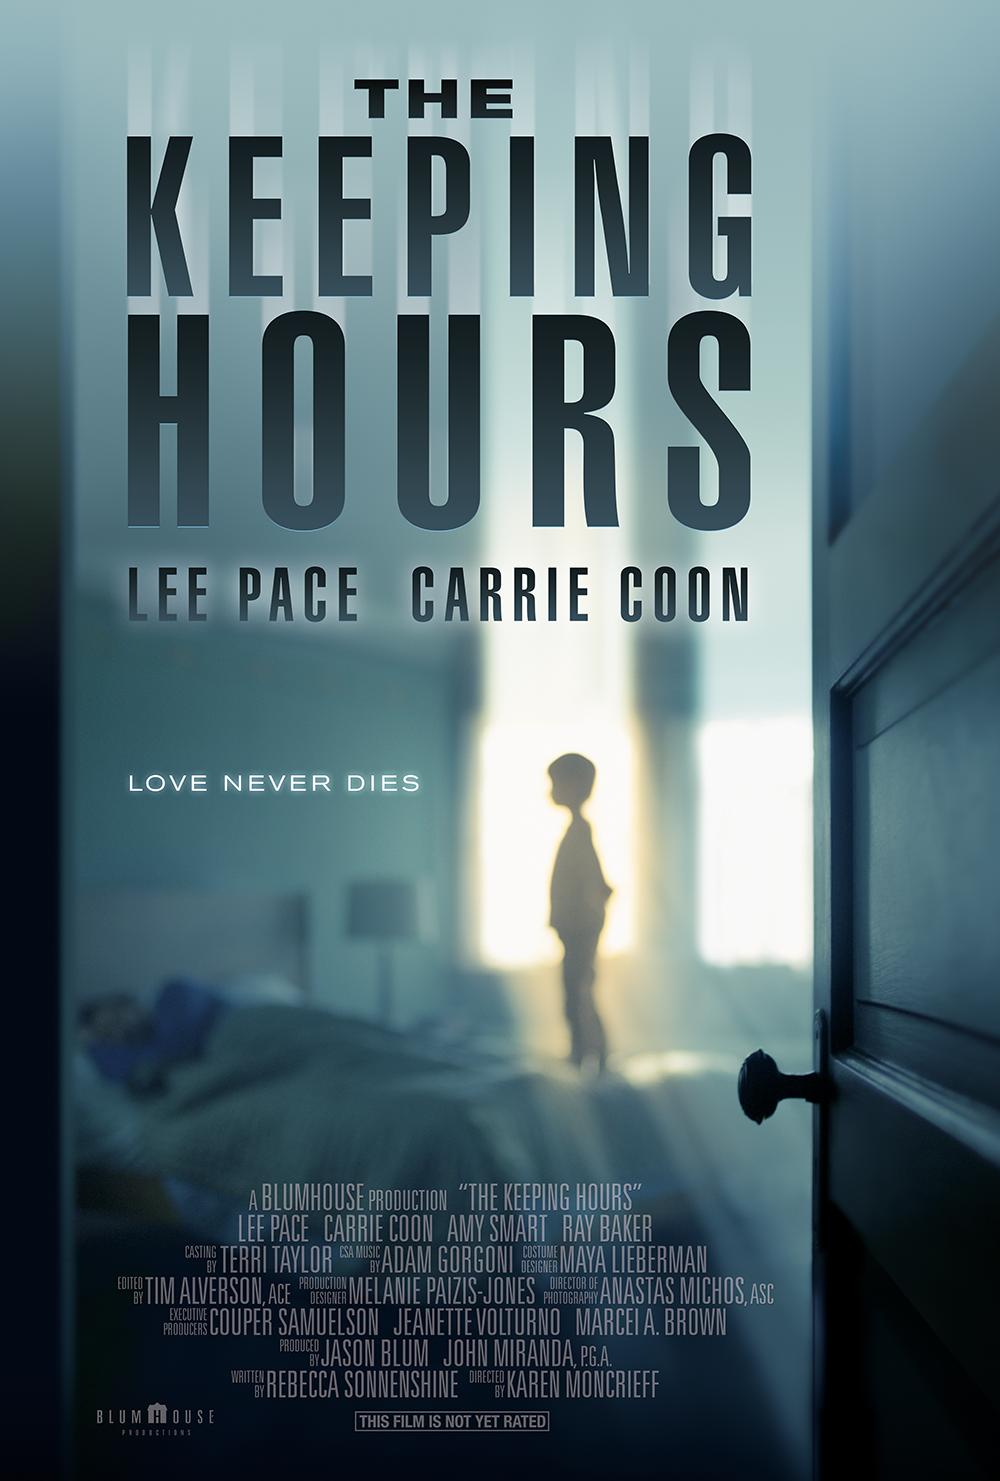 The Keeping Hours (2017) Lee Pace